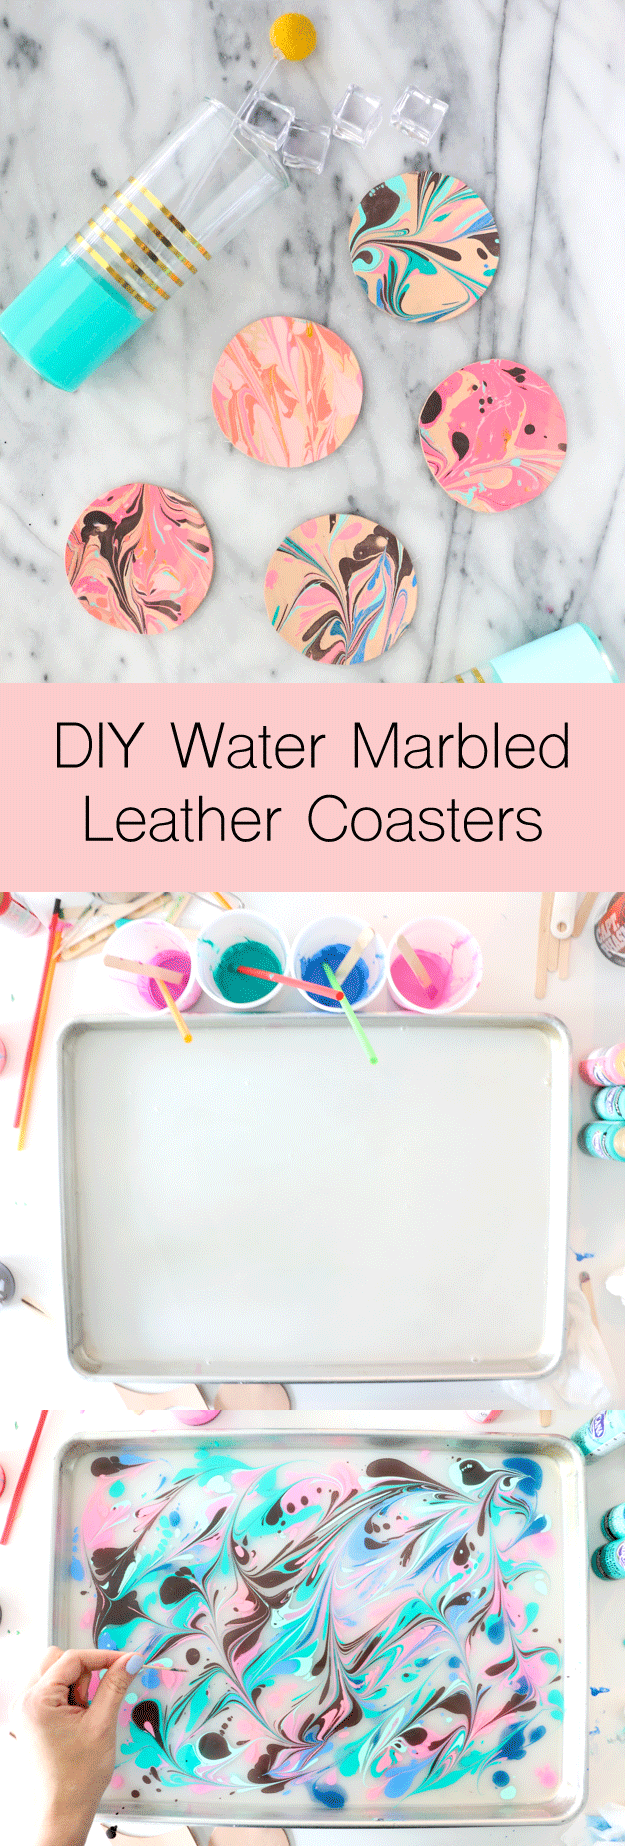 DIY-Water-Marbled-Leather-Coasters-5